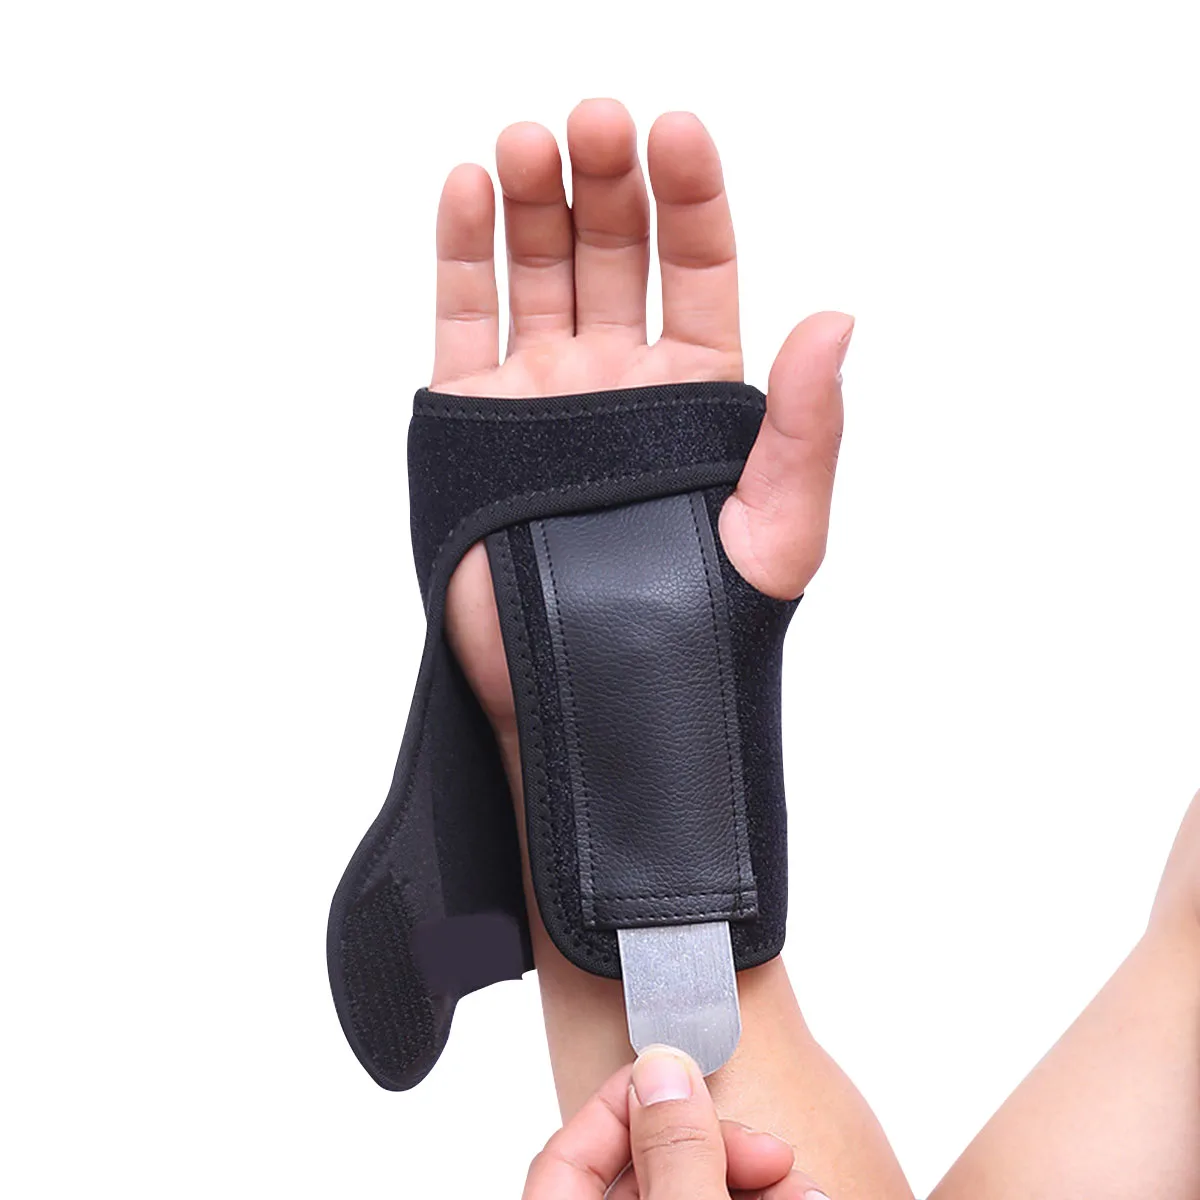 

Sports Wrist Support Brace Protective Wrist Palm Splint Support Guard with Steel Board for Carpal Tunnel Tendonitis Pain Sprain